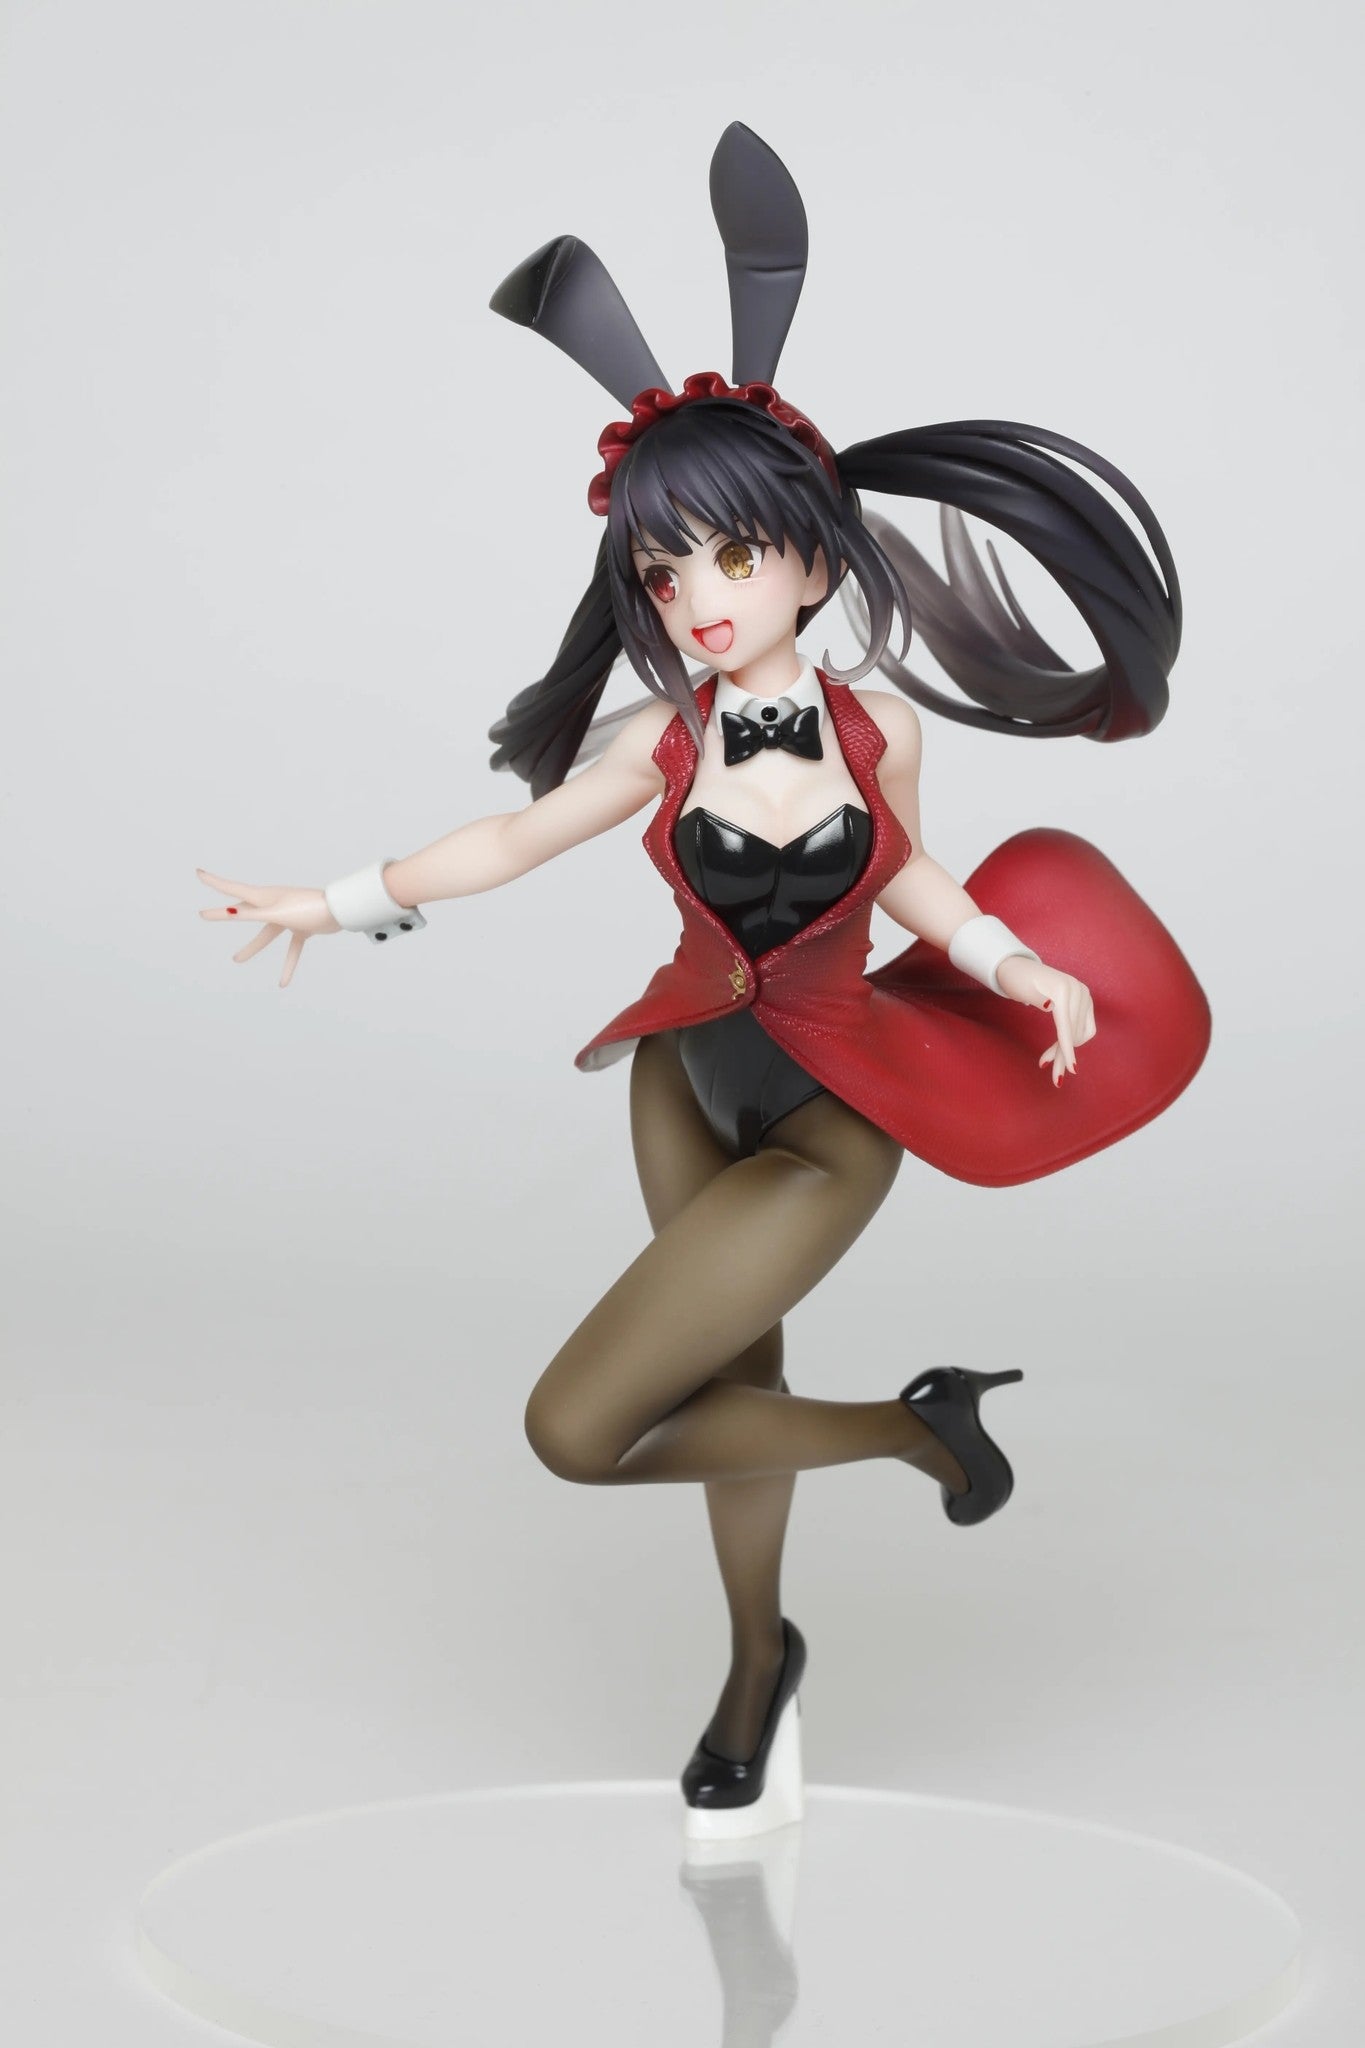 IMMANANT Anime Figure Girl Eruru Maid Bunny Ver 14 EcchiHentai Figure  Clothes Are Removable cute Girl DolltoyStatue PVC Anime  CollectableCharacter Model collectdecorationgift 26cm101inc   Amazoncouk Toys  Games